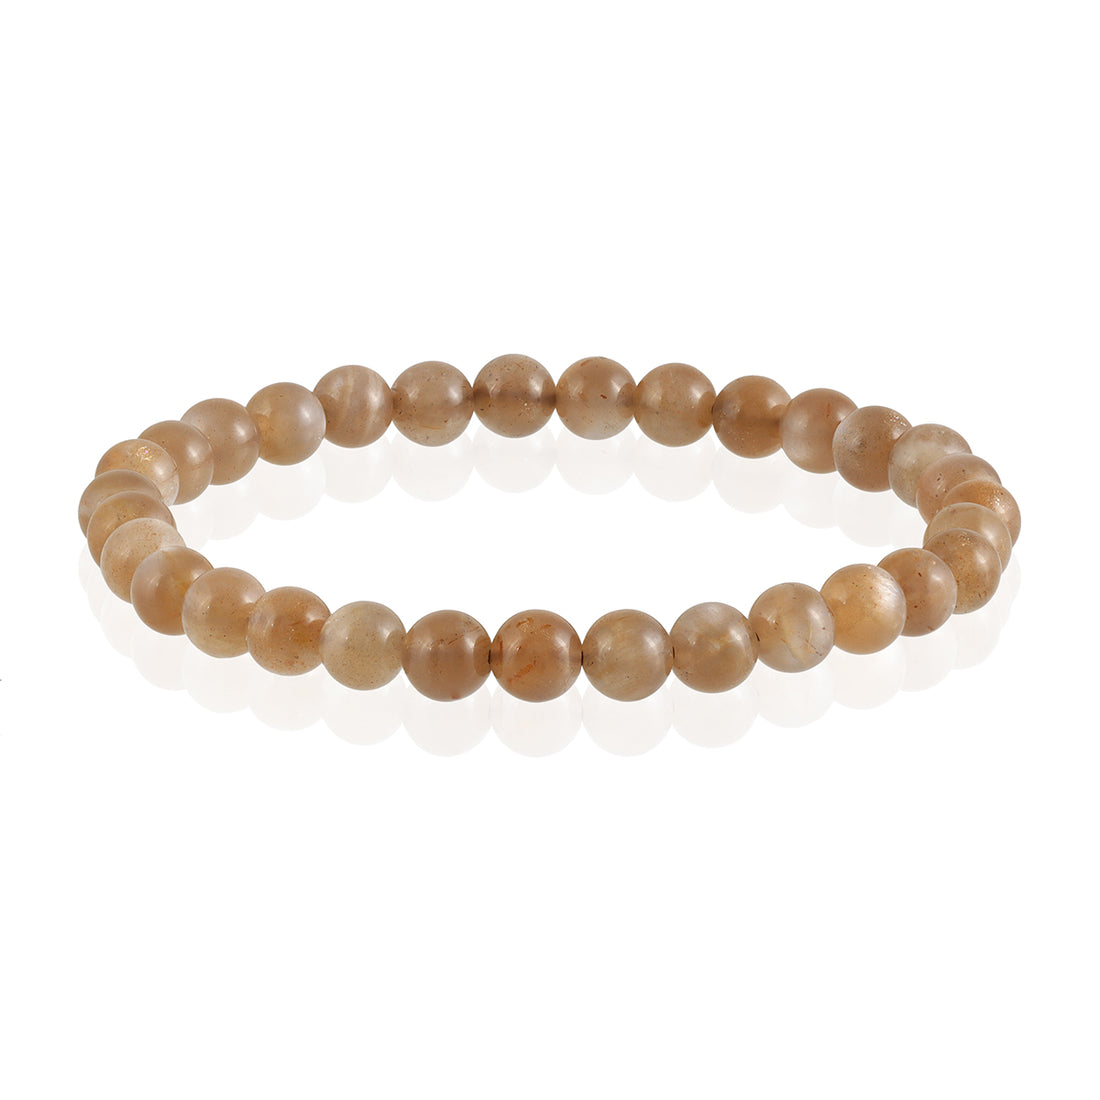 Artistic representation symbolizing divine feminine energy, featuring the Chocolate Moonstone Bracelet as a source of empowerment, intuition, and emotional balance.